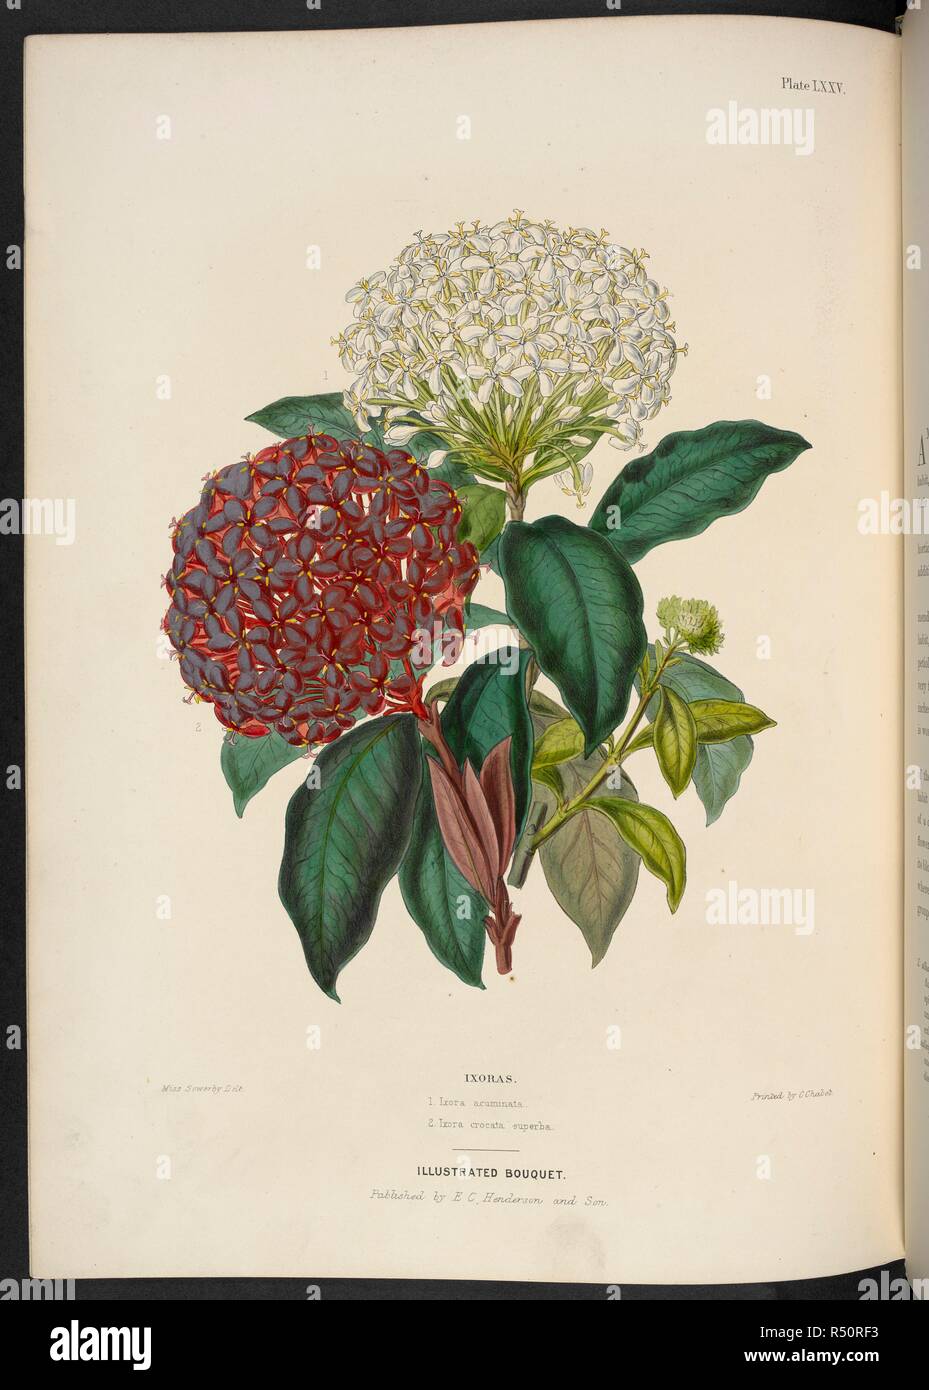 New Ixoras. Ixoras. 1. Ixora acuminata; 2. Ixora crocata, superba. The Illustrated Bouquet, consisting of figures, with descriptions of new flowers. London, 1857-64. Source: 1823.c.13 plate 75. Author: Henderson, Edward George. Sowerby, Miss. Stock Photo